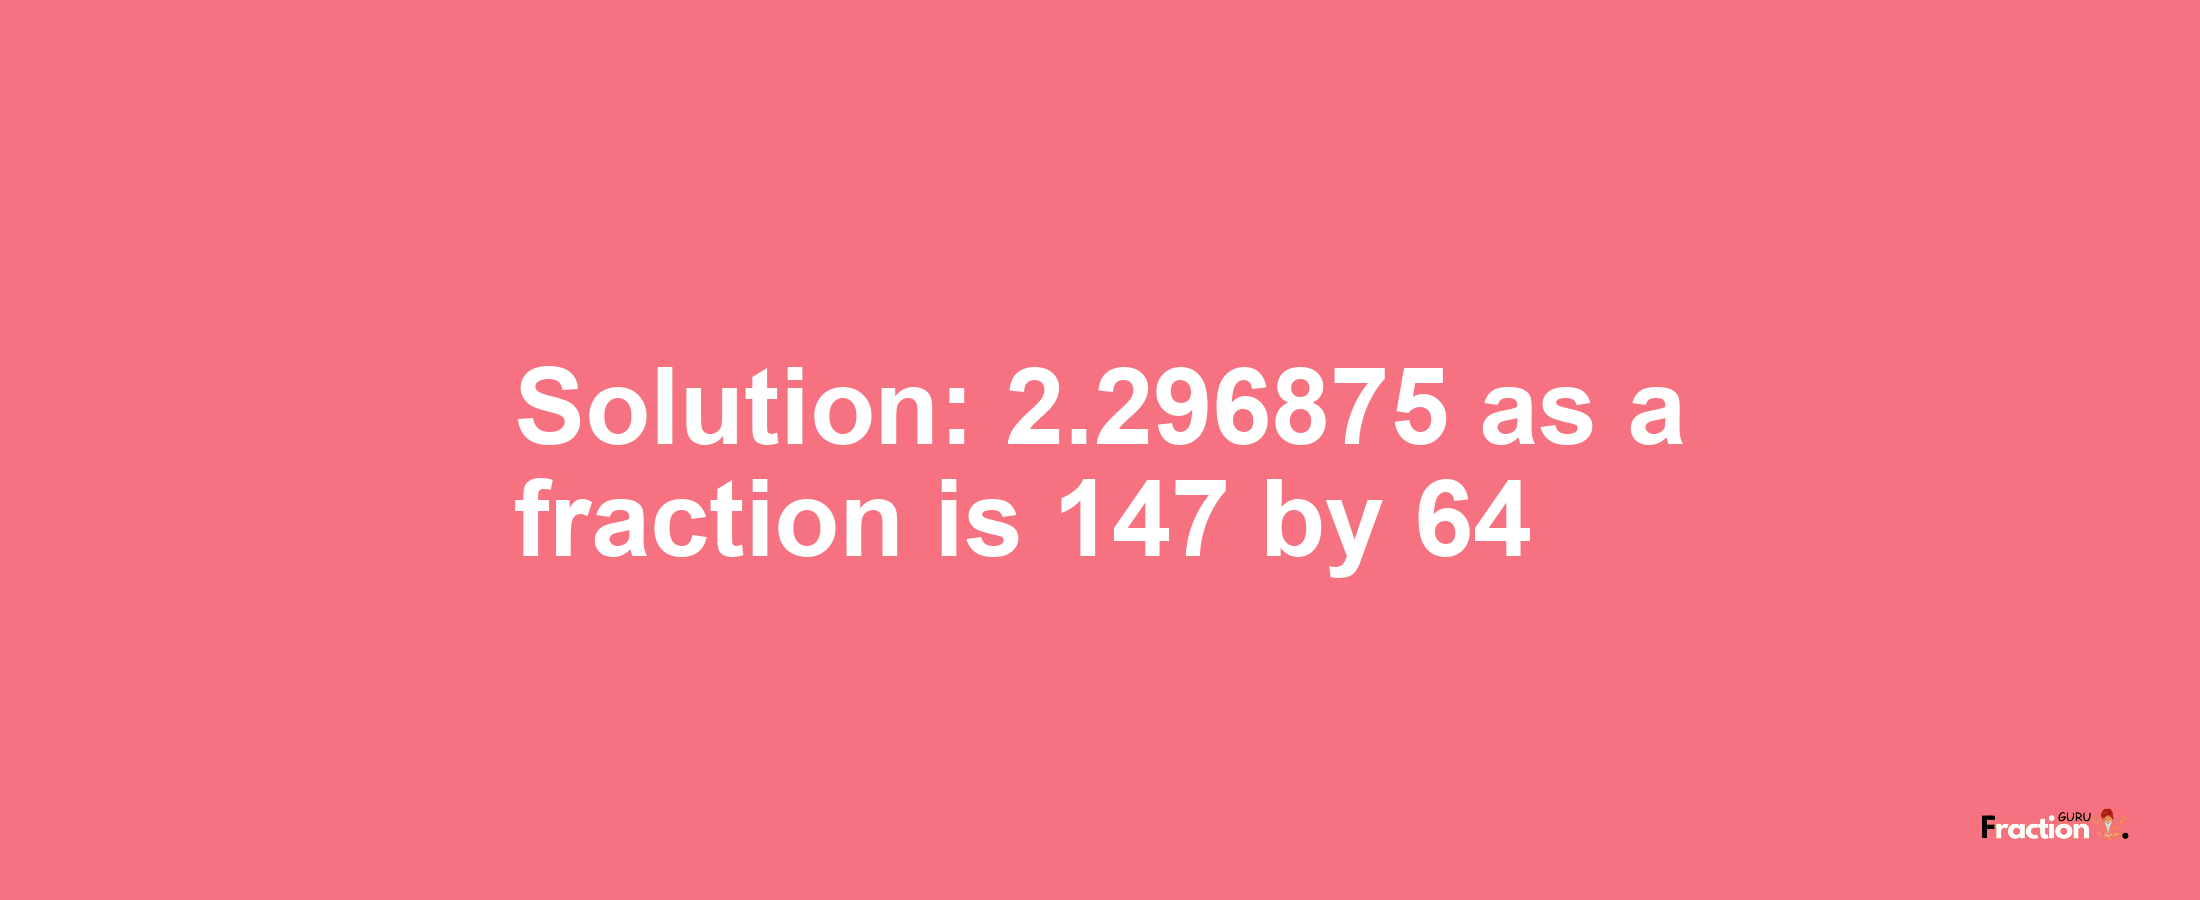 Solution:2.296875 as a fraction is 147/64